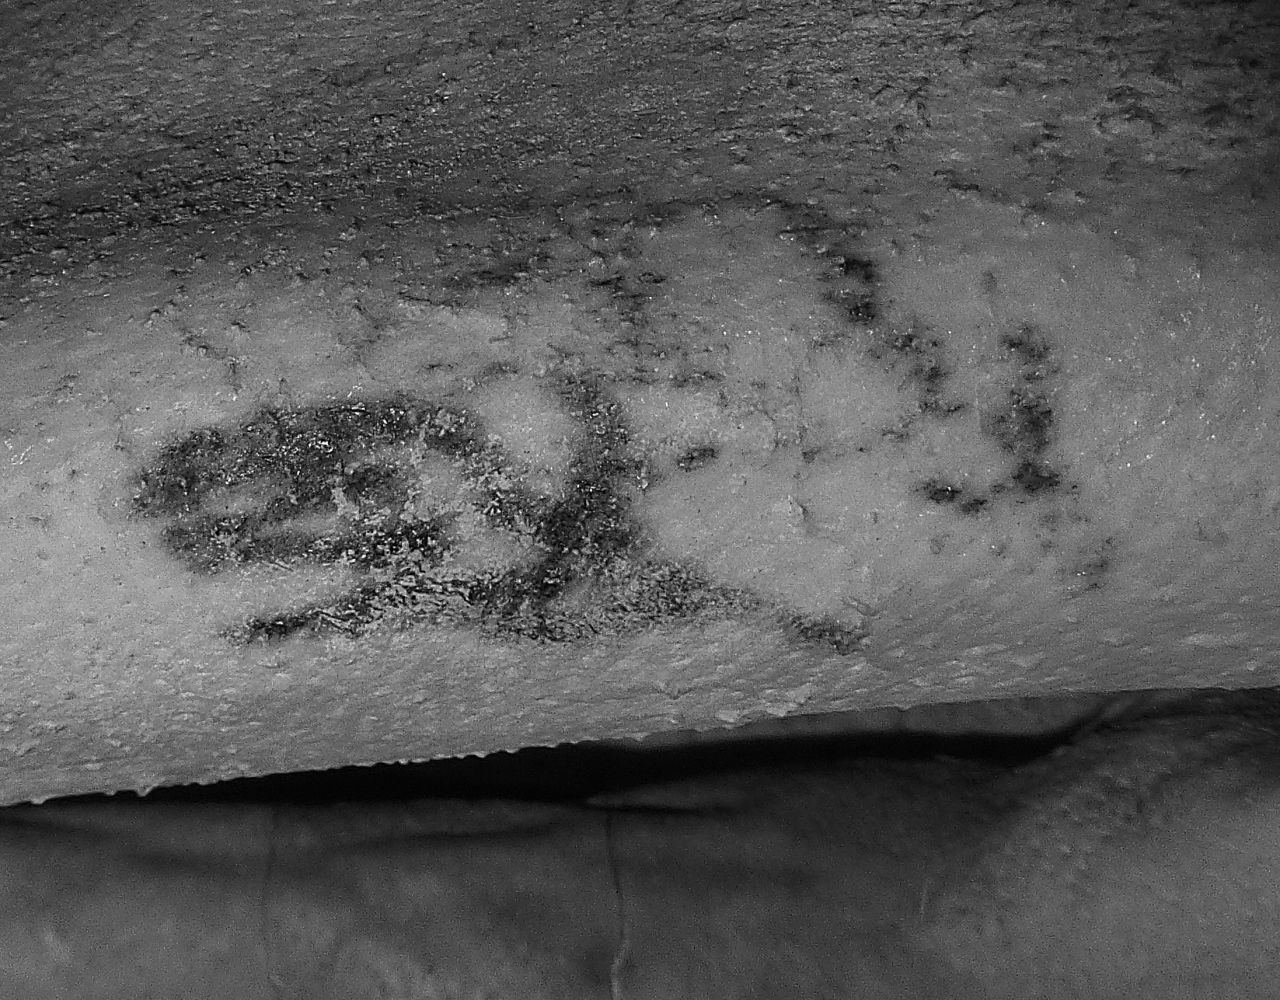 Dark smudges on the upper arm of the male mummy had been left unexamined until now. Using infrared imaging researchers could make out tattoos on his upper arm, of two slightly overlapping horned animals.